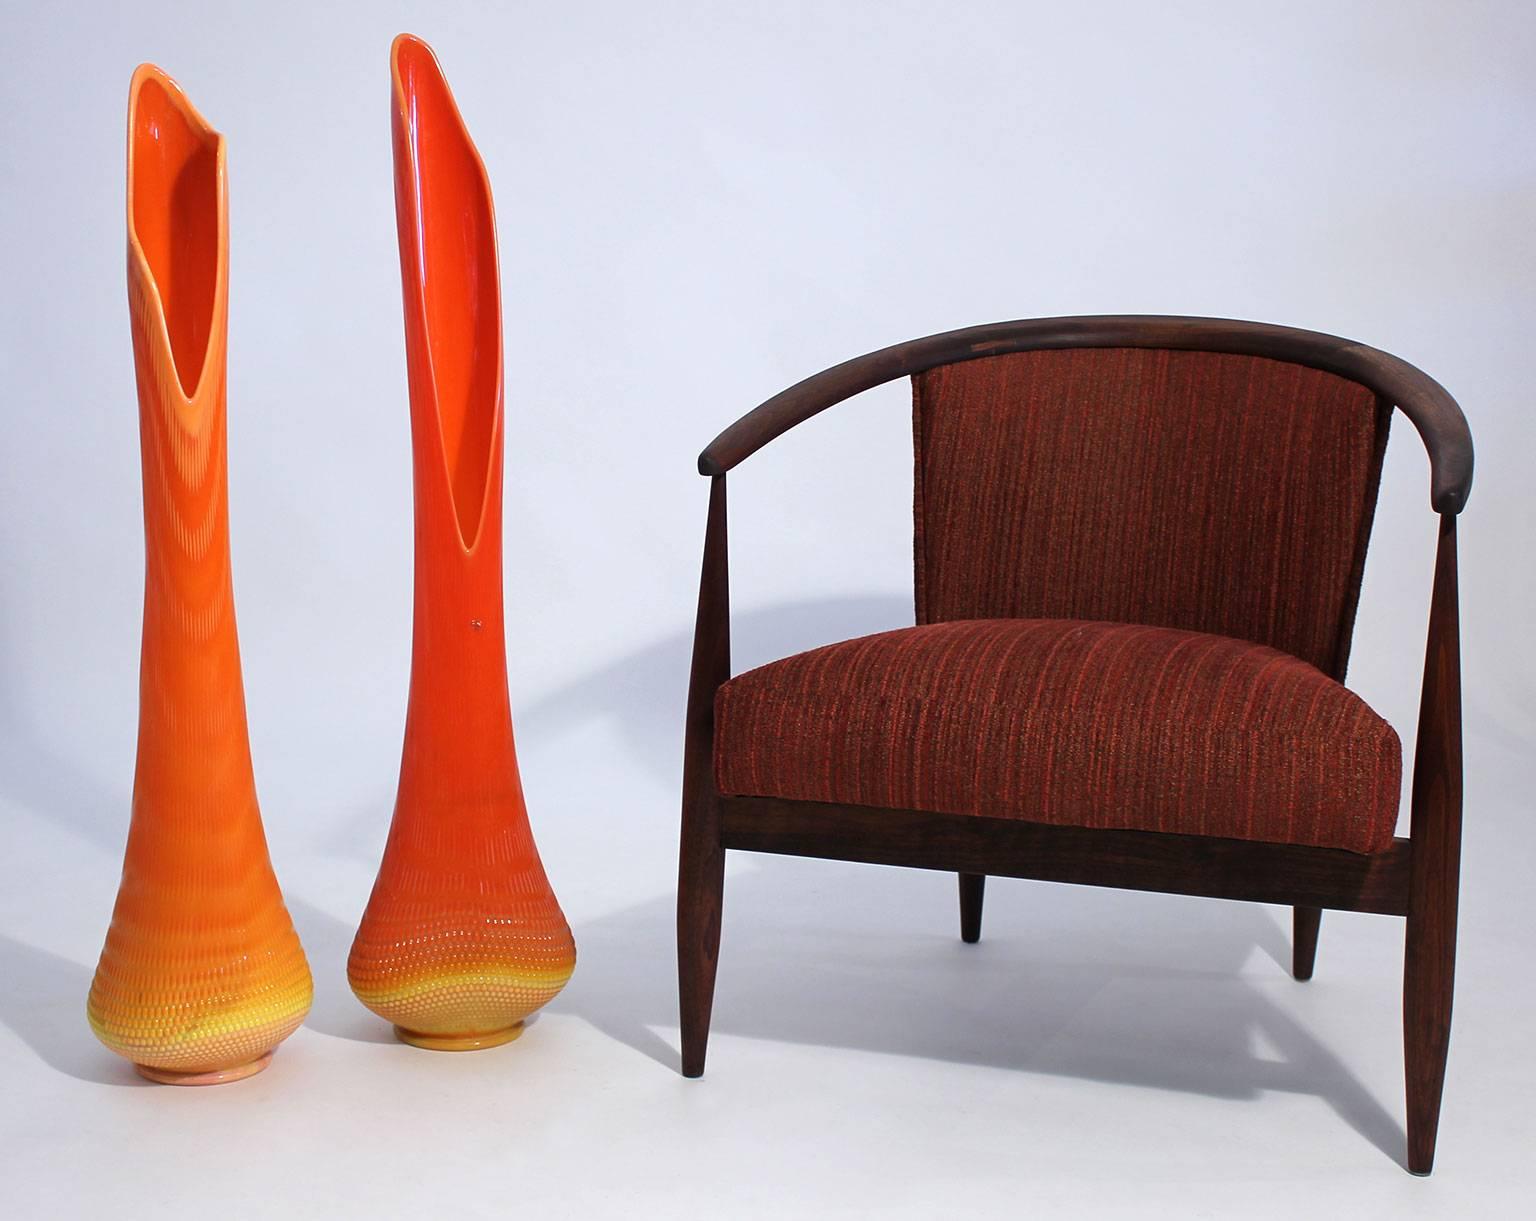 Massive store window display Viking Glass floor vases. This pair were used in window displays during the 1960s. Handblown and great orange and yellow color. In excellent condition with no damage. 
These vases measure: 38